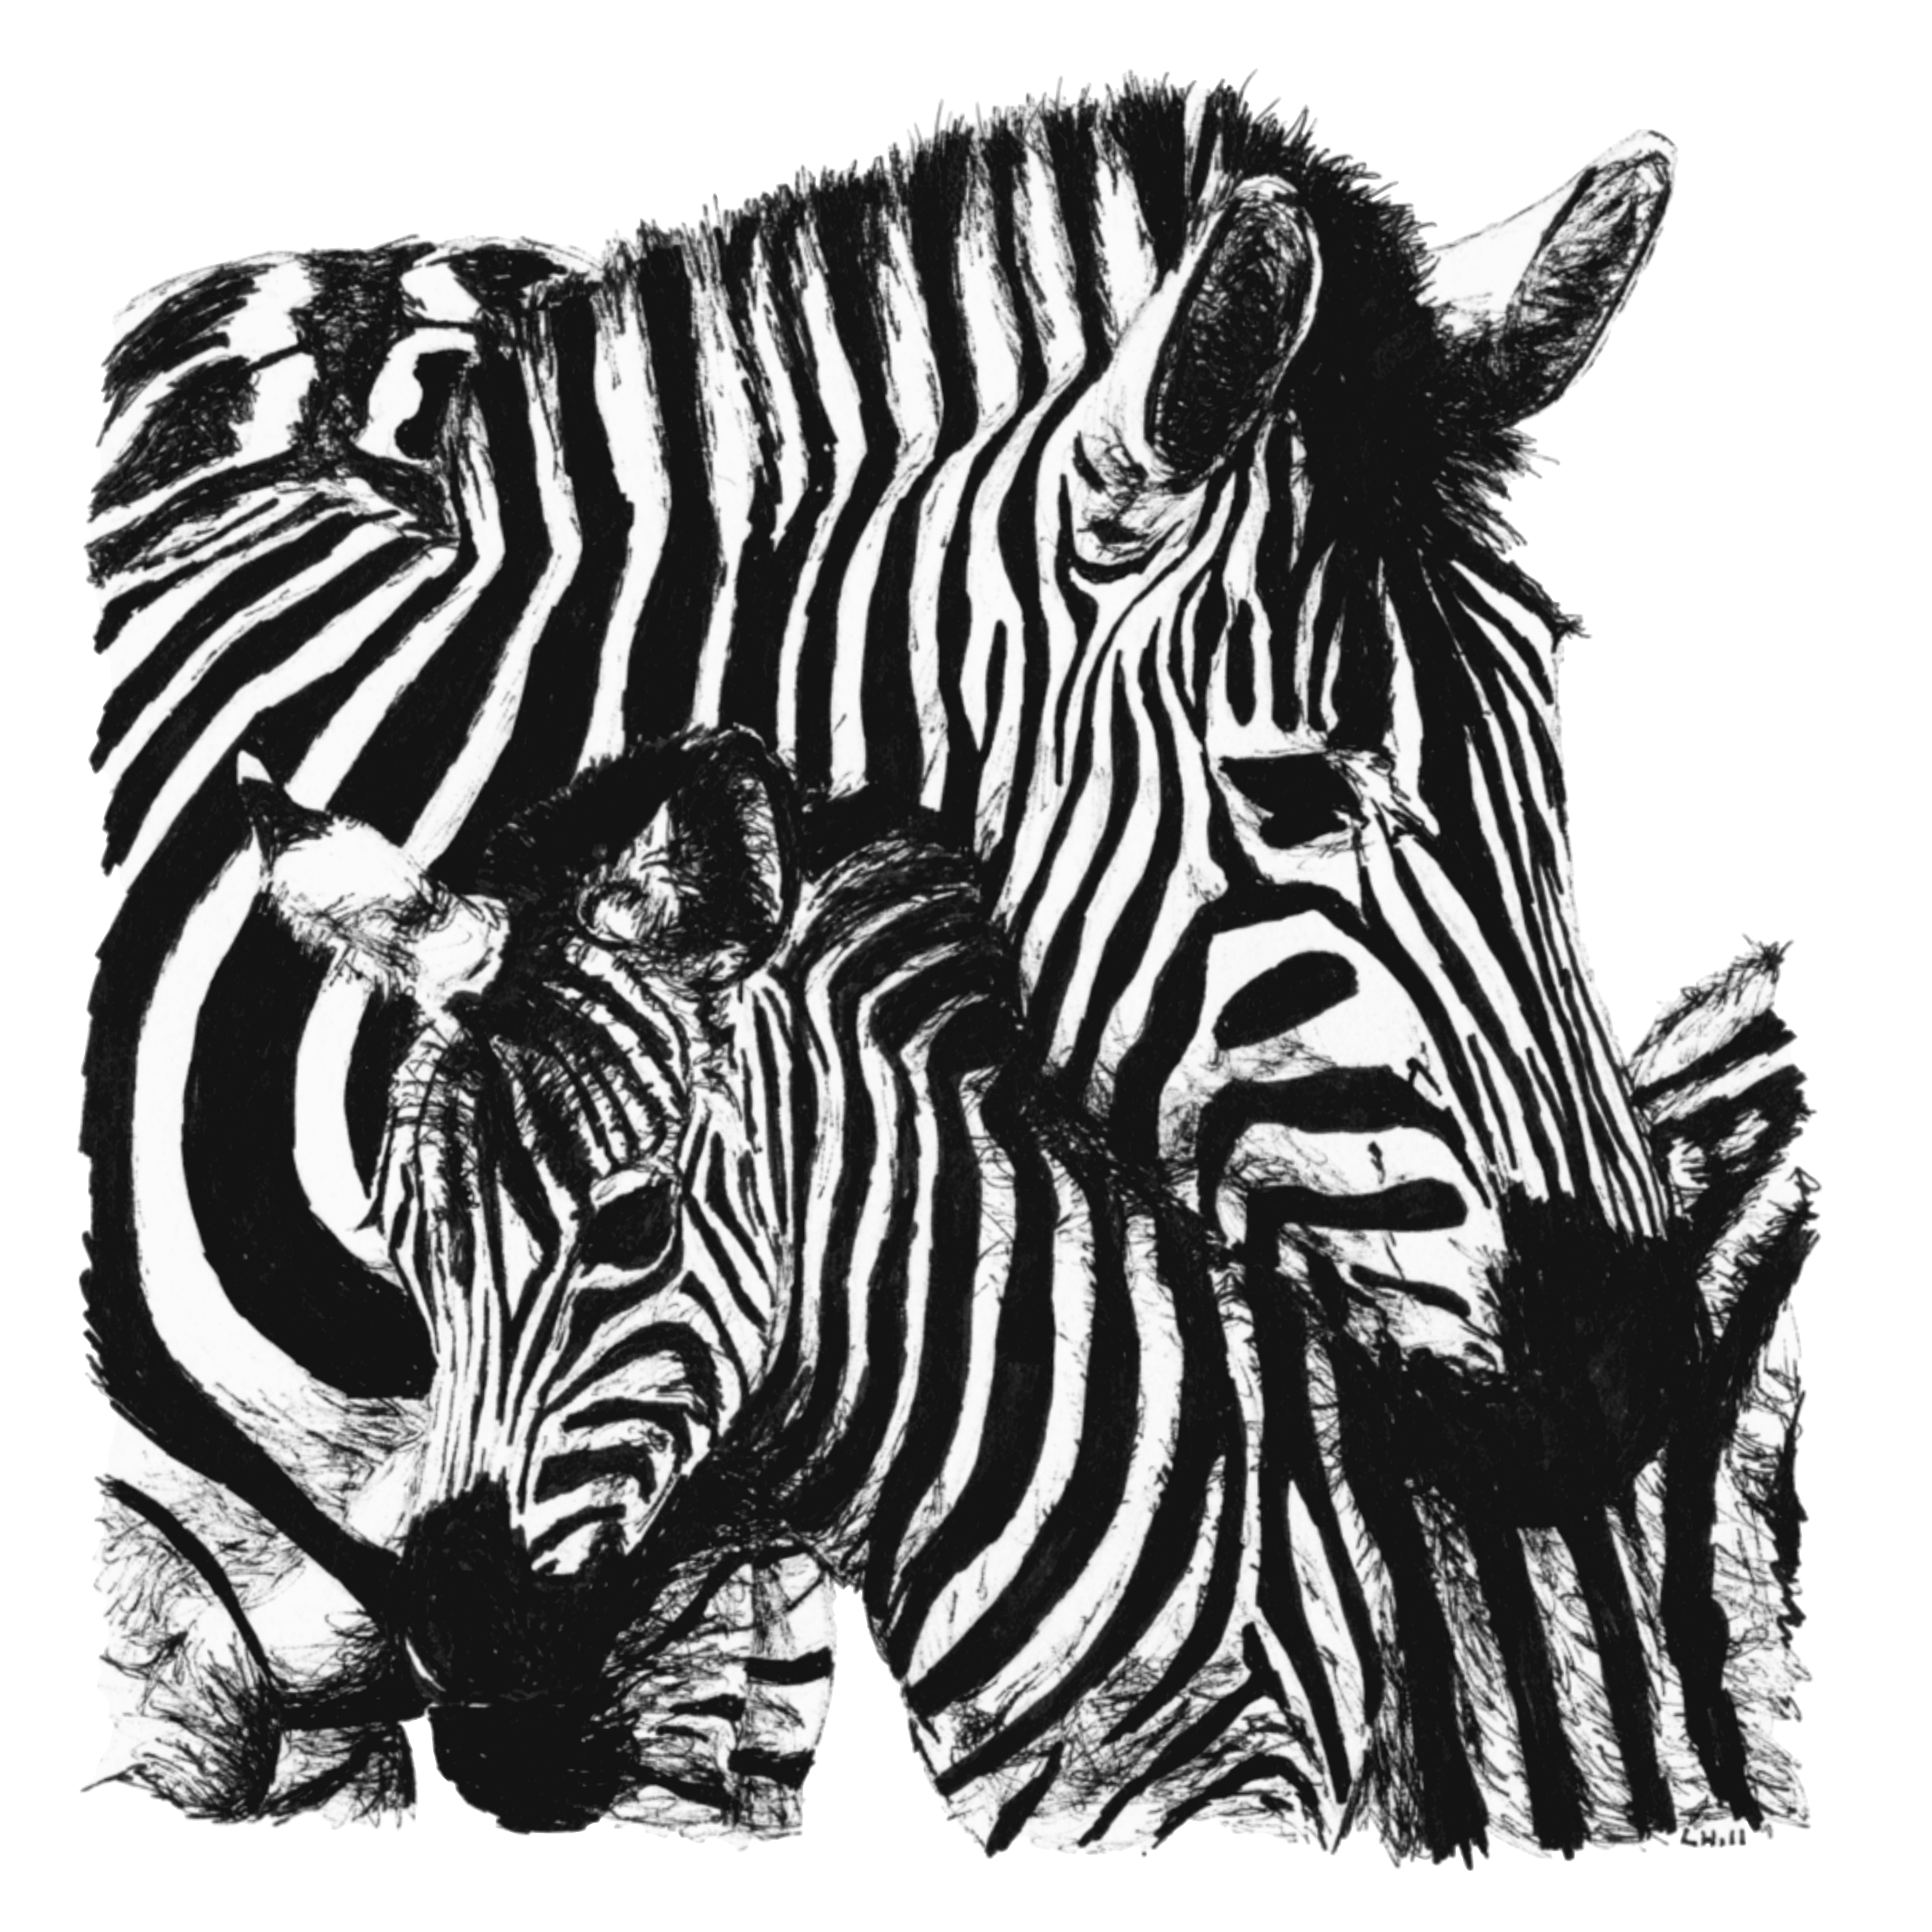 Zebra and Foal pen and ink illustration by Louisa Hill